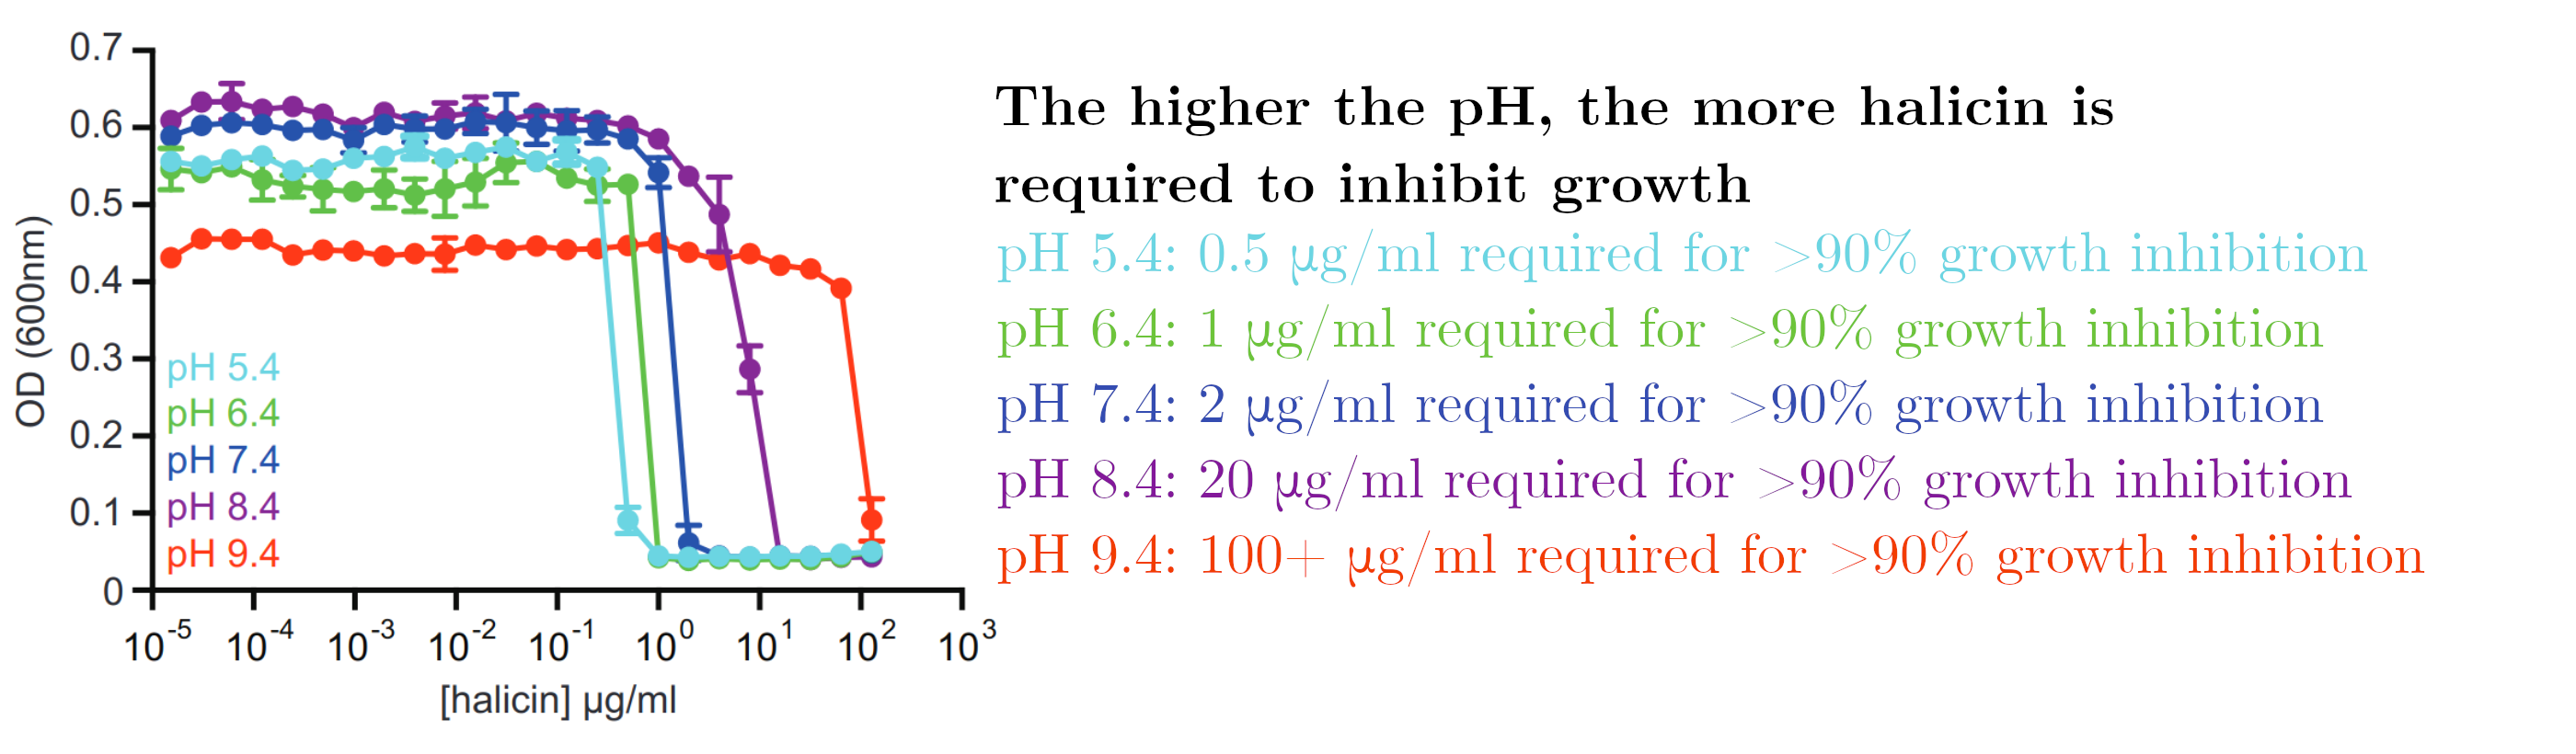 The higher the pH, the more halicin is required to inhibit growth. // pH 5.4: 0.5ug/ml required for >90% growth inhibition. // pH 6.4: 1ug/ml required for >90% growth inhibition. // pH 7.4: 2ug/ml required for >90% growth inhibition. // pH 8.4: 20ug/ml required for >90% growth inhibition. // pH 9.4: 100+ ug/ml required for >90% growth inhibition.